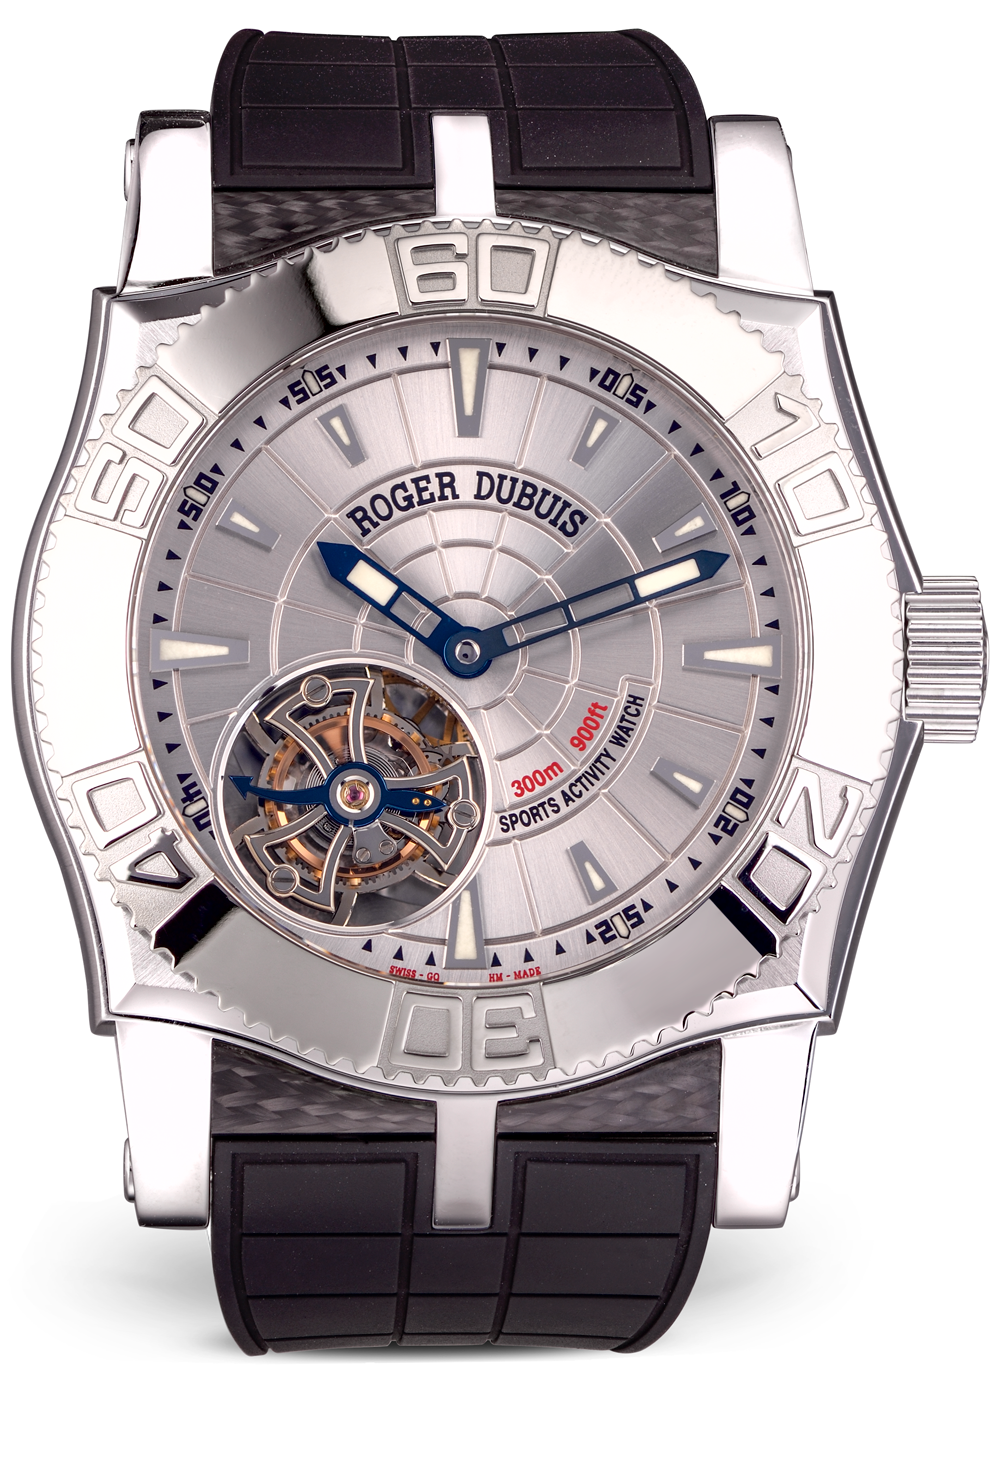 Roger Dubuis EasyDiver Tourbillon Stainless Steel Mens Watch